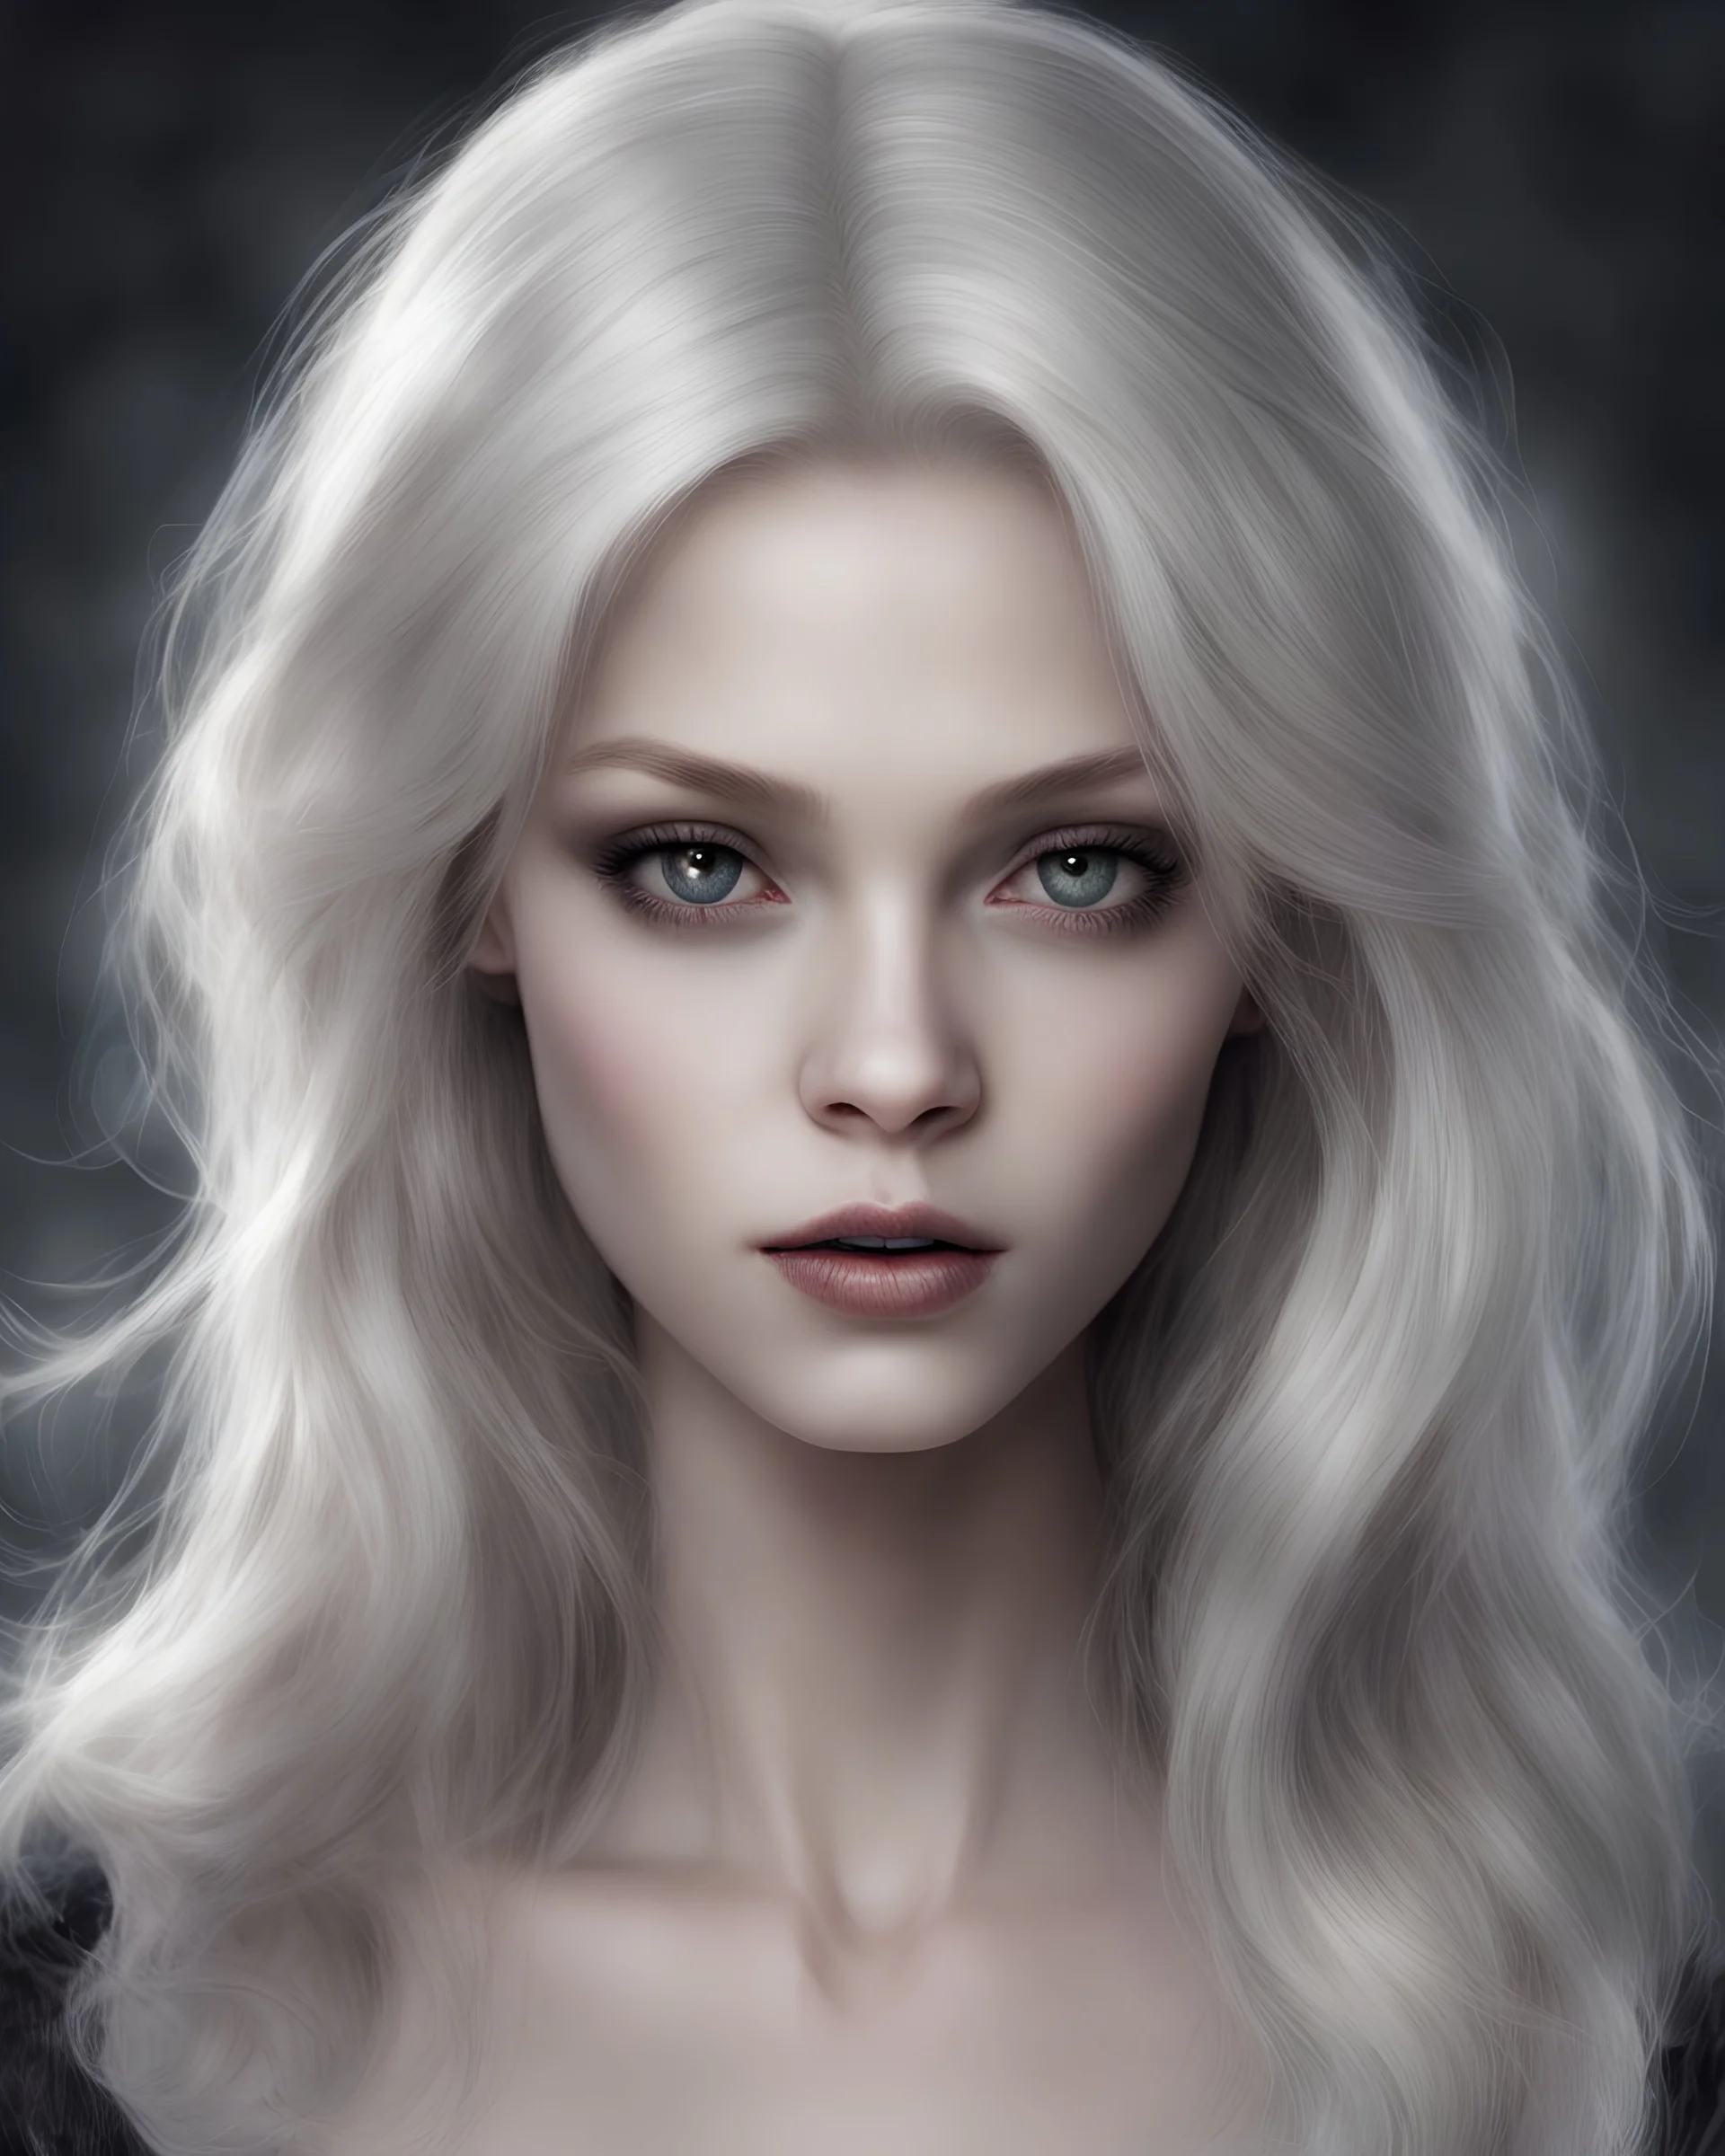 eye candy vampire Alexandra "Sasha" Aleksejevna Luss render eye candy style Artgerm Tim Burton,I've been lost in your eyes all afternoon The more I drift, the closer I get to you She's a ghost and the truth, it's impossible, but I love her lies You make sure I don't find somebody new It's the way you move It's the way you move, ooh-ooh I knew I would stay with you after just one touch The way you move has got me stuck Stuck, got me stuck Stuck, got me stuckbackground sty